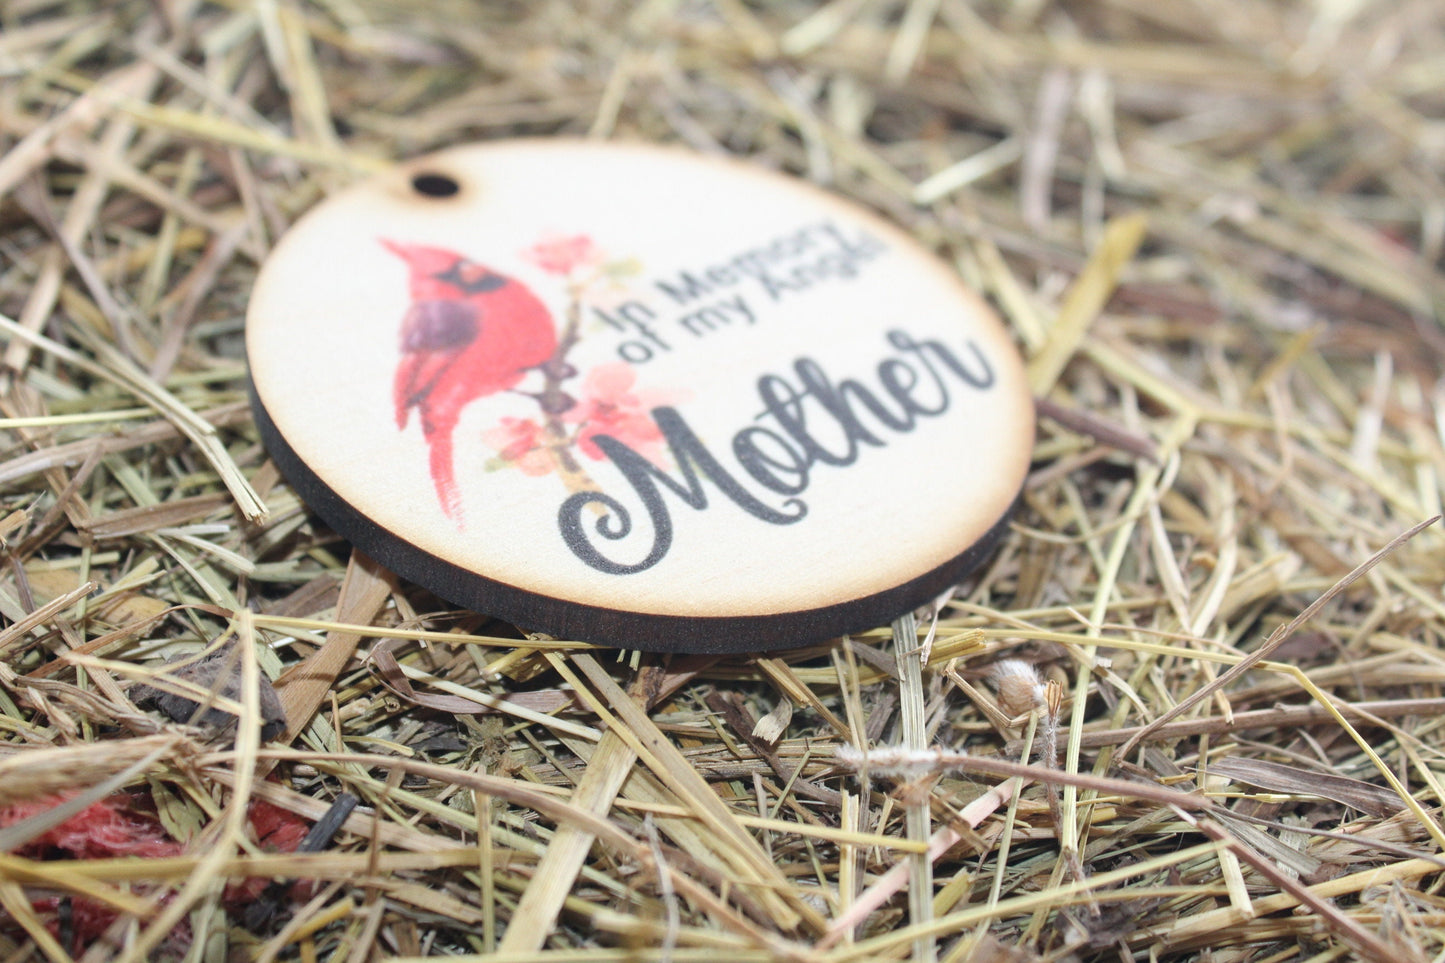 In Memory Of My Angel Mother Cardnial In Rememberance Memorial Christmas Holiday Ornament Woodslice Keychain Gift Tag Round